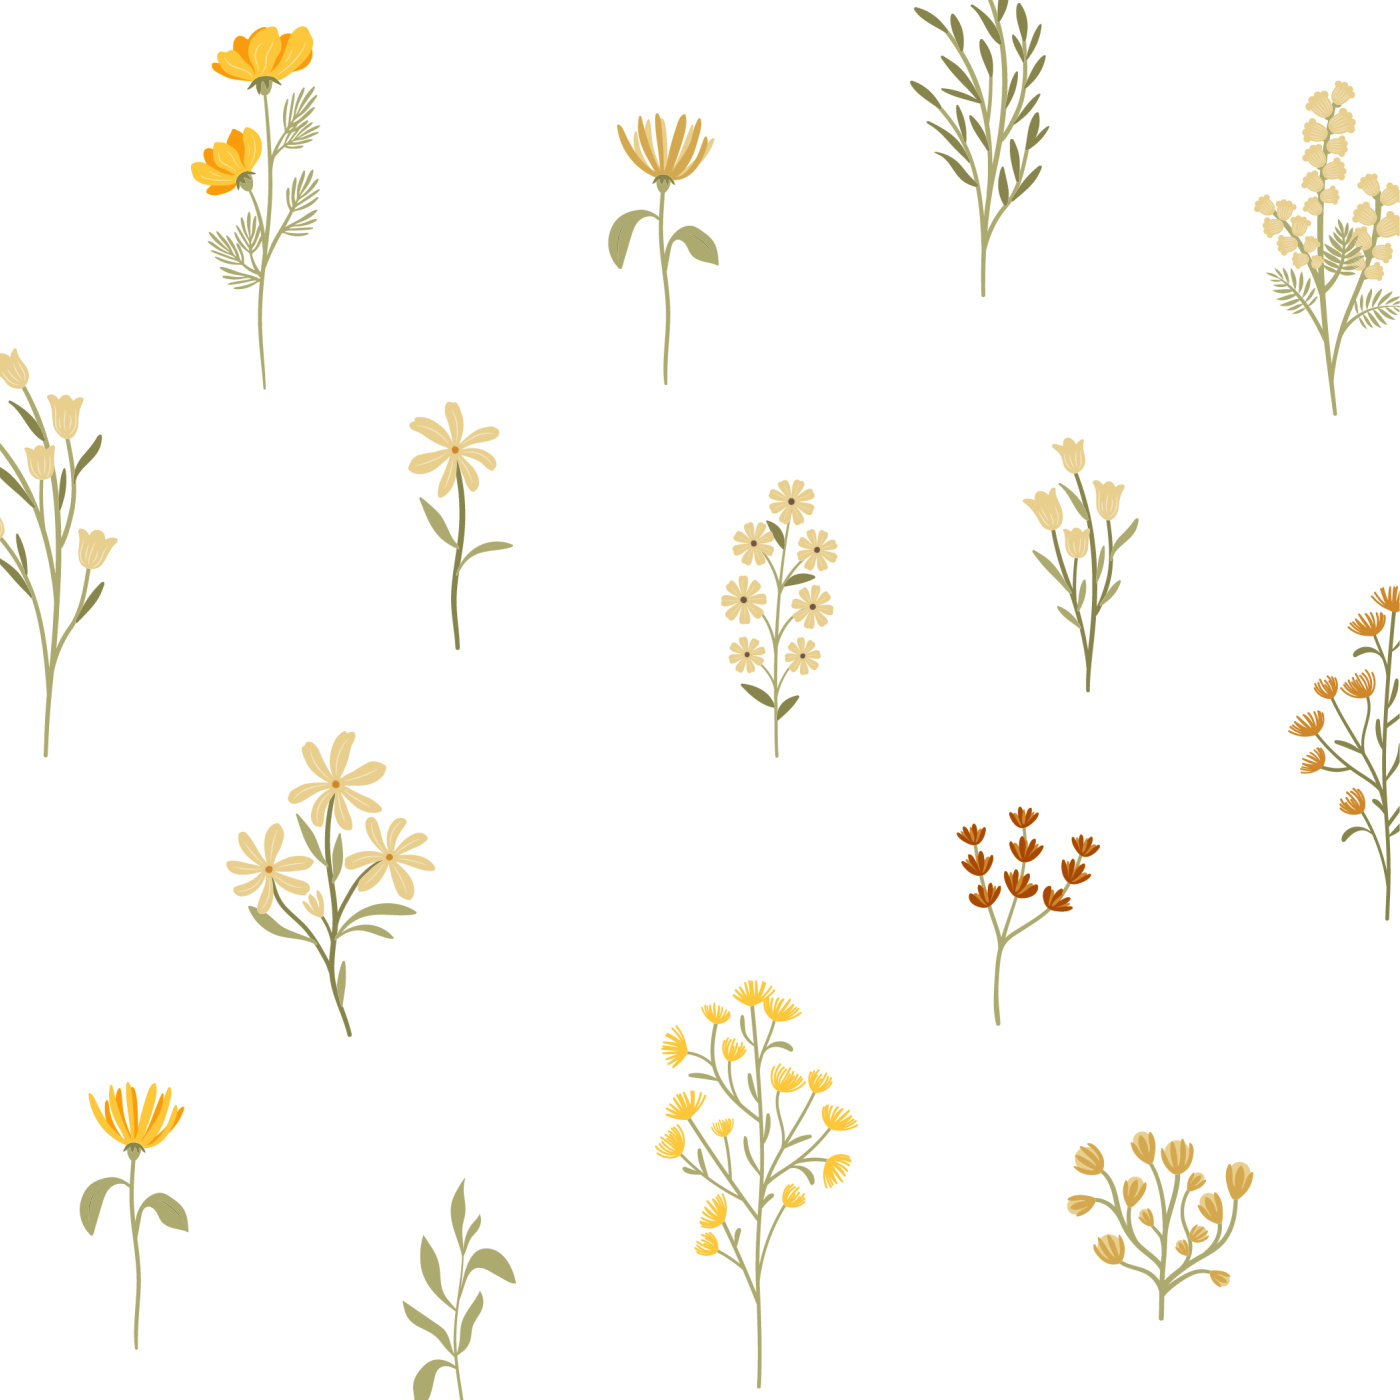 Download free vector of Variety of Wild Flowers Vector Illustration about  meadow meadow flowers  Wildflower drawing Flower drawing Flower background  wallpaper